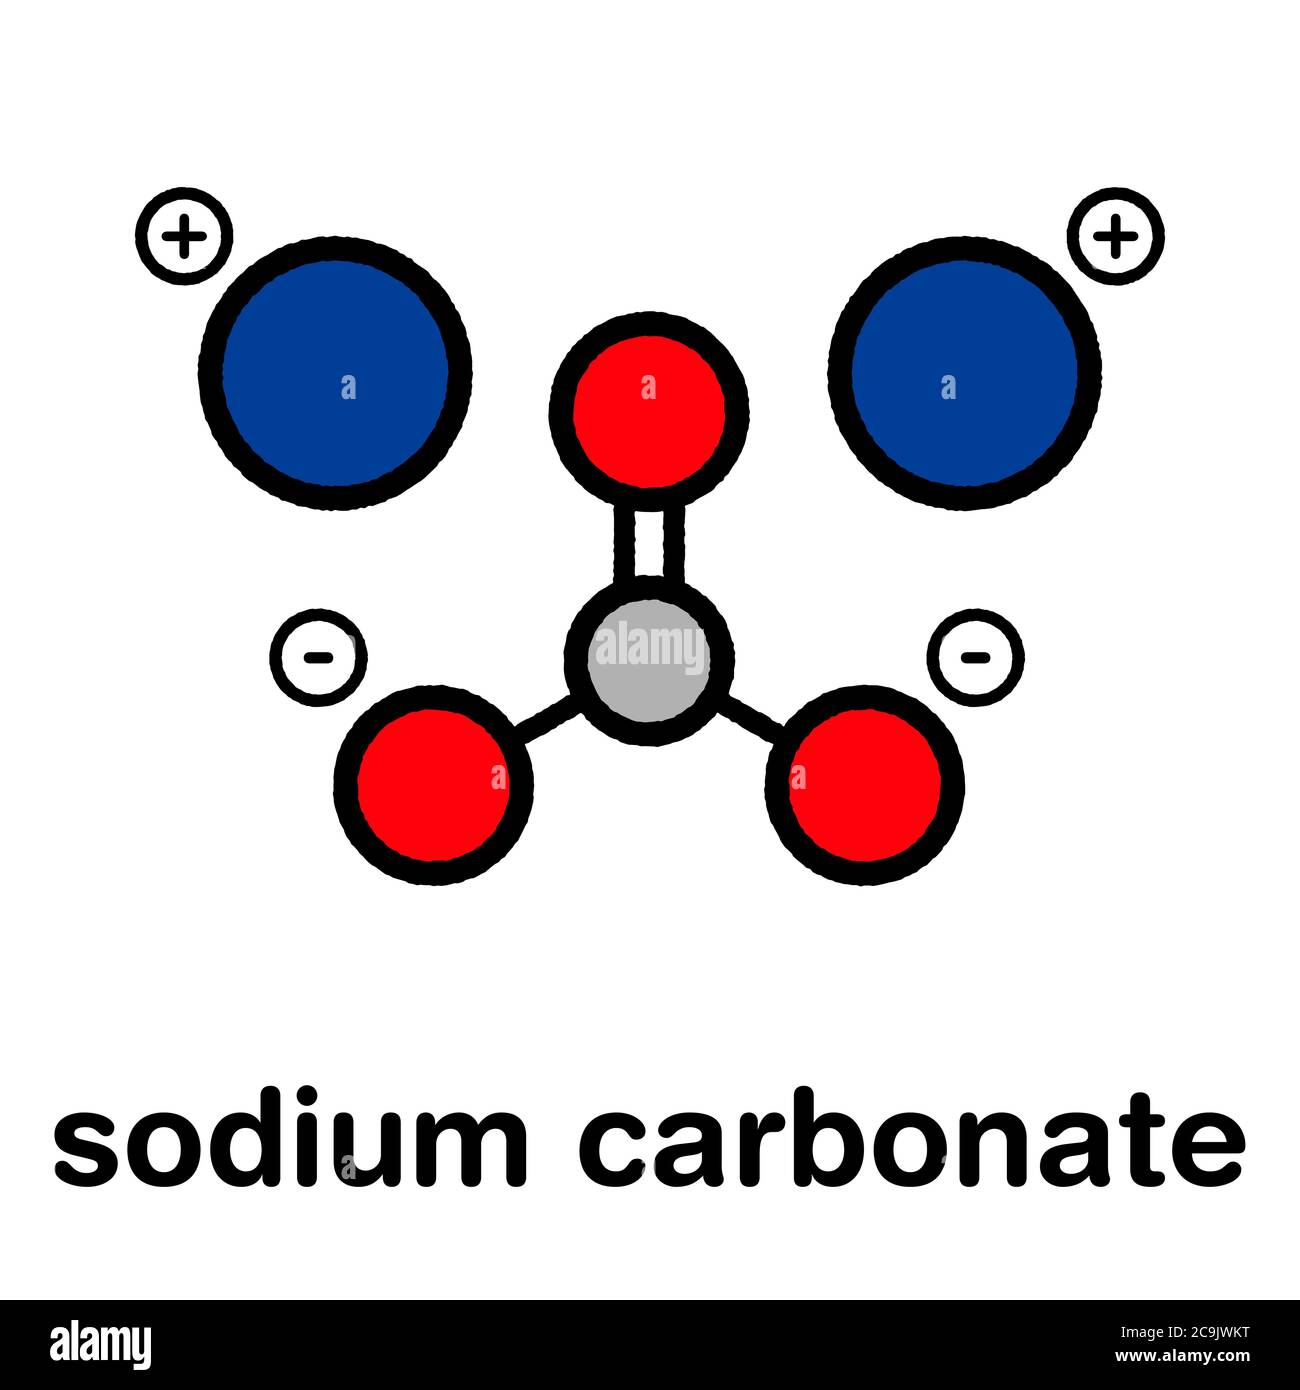 Sodium carbonate salt (washing soda, soda crystals), chemical structure. Stylized skeletal formula (chemical structure): Atoms are shown as color-code Stock Photo